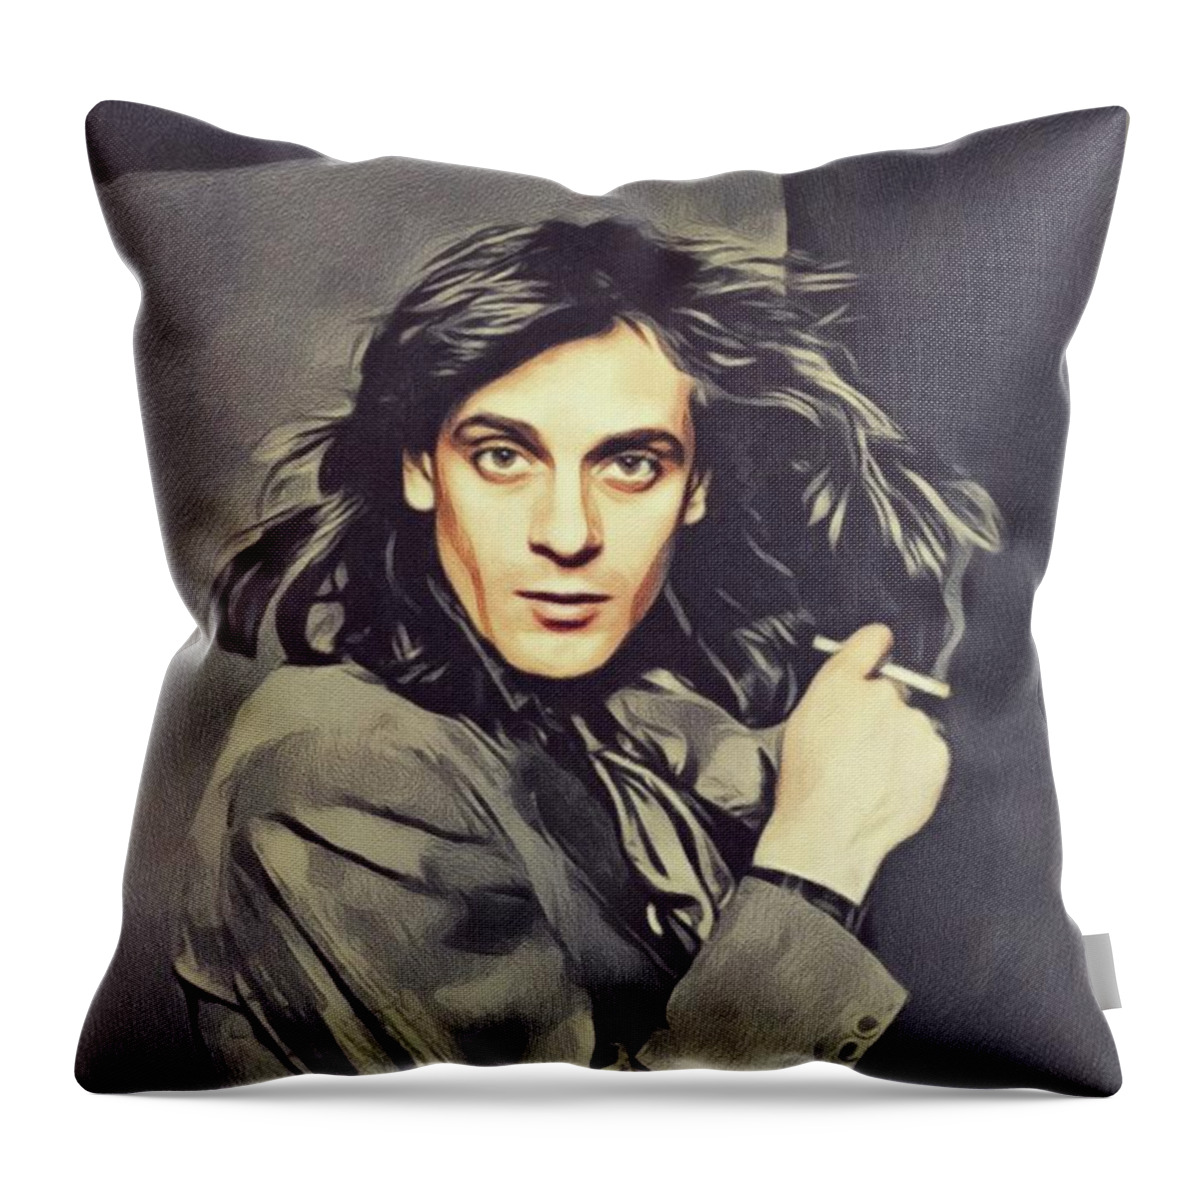 Eddie Throw Pillow featuring the painting Eddie Money, Music Legend by Esoterica Art Agency